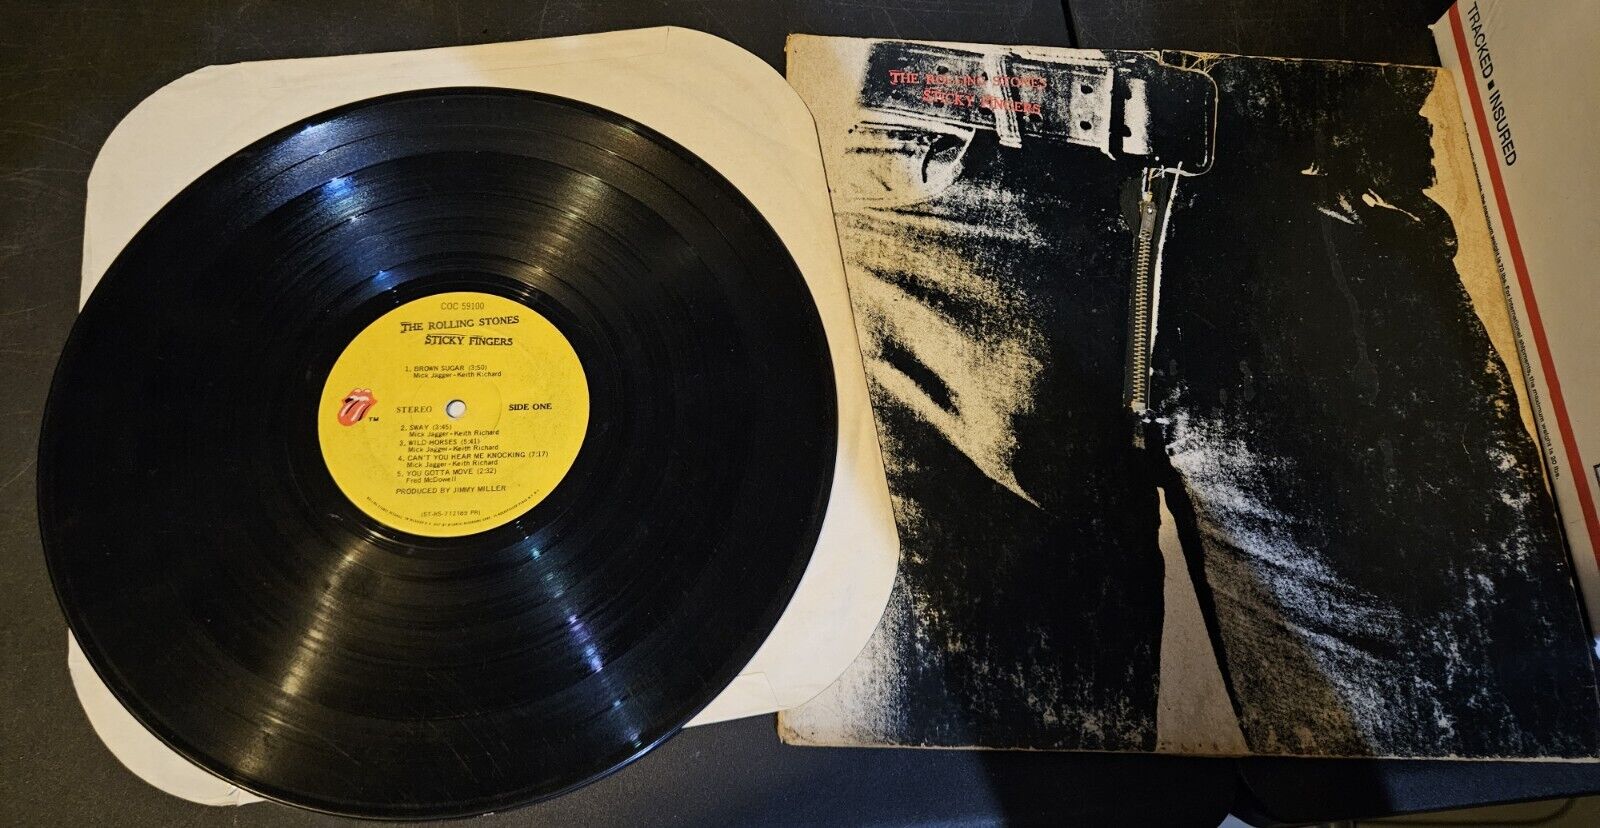 THE ROLLING STONES STICKY FINGERS ROLLING STONES RECORDS COC59100 US 1971